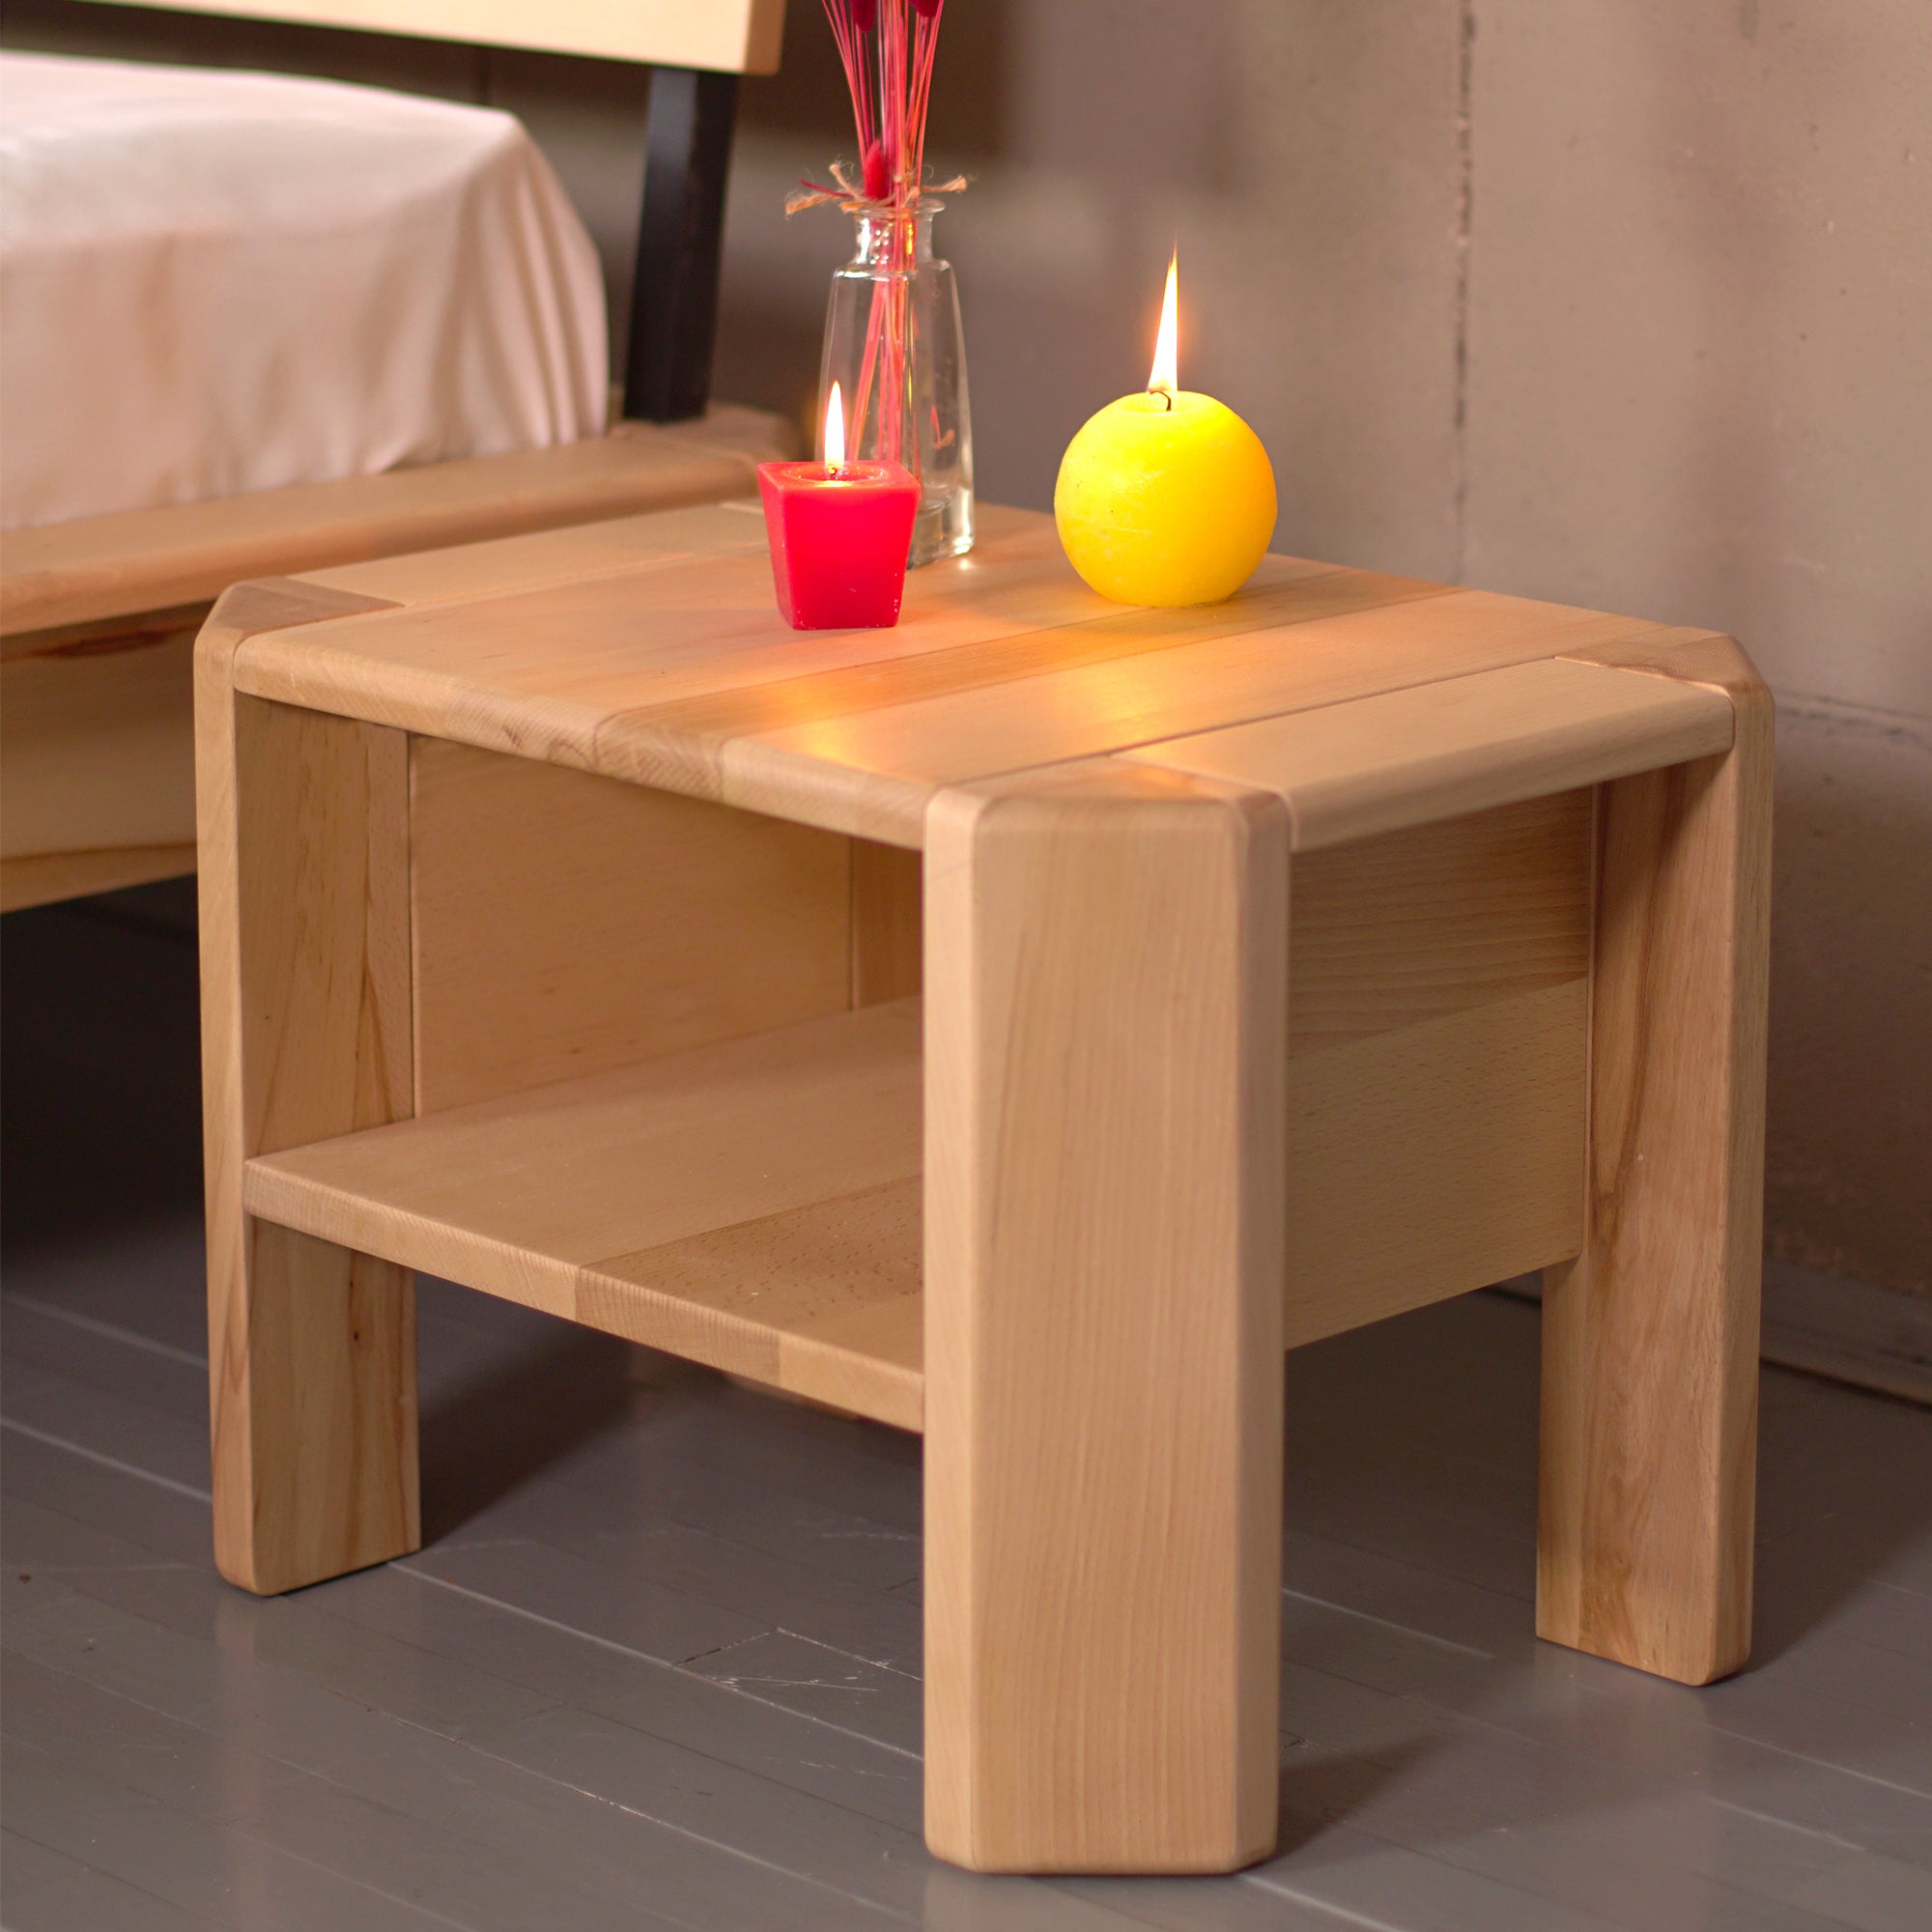 LOFT Bedside Table, Beech Wood-natural colour-without doors-interior view